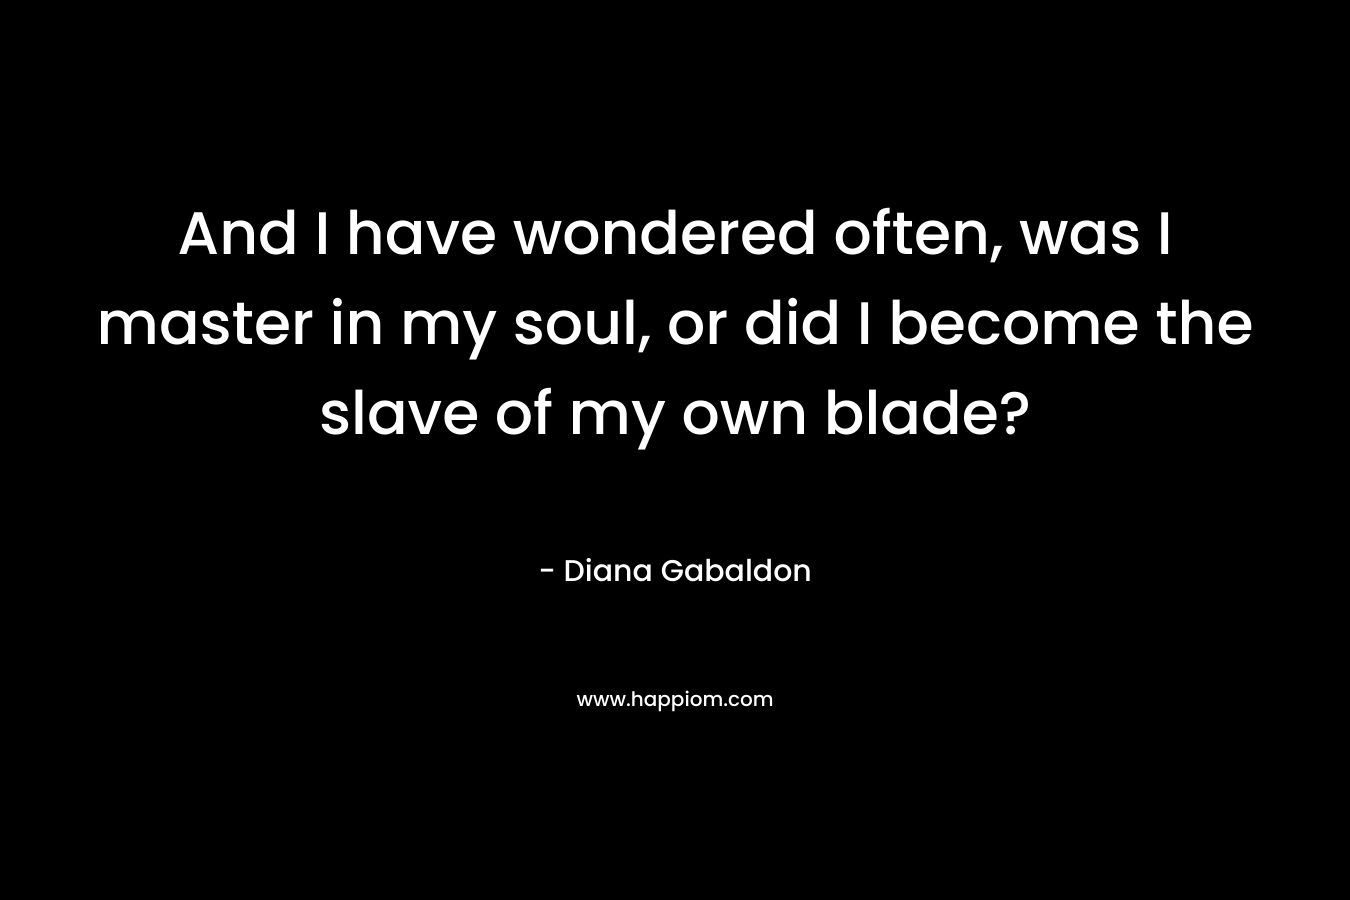 And I have wondered often, was I master in my soul, or did I become the slave of my own blade? – Diana Gabaldon